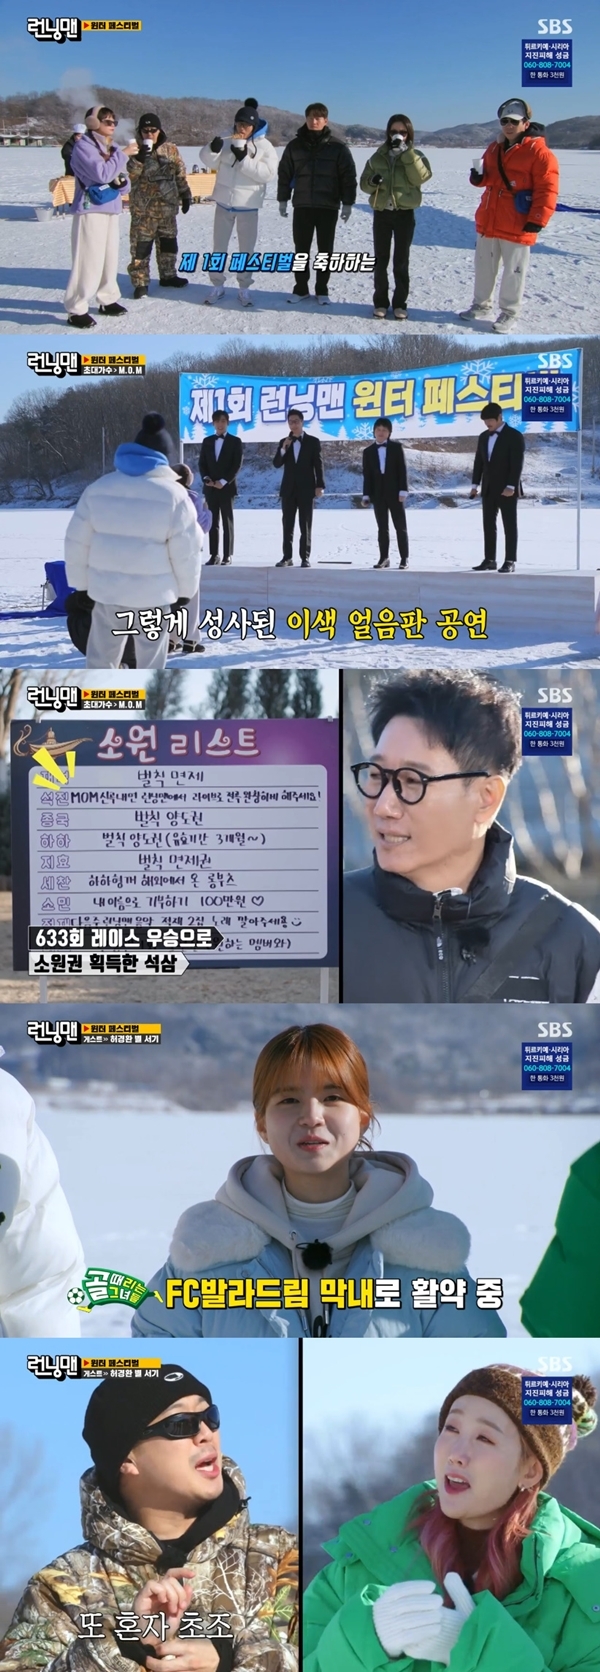 The first Running Man Winter festival was held on the 19th at the SBS  ⁇ Running Man ⁇ . Matching the name of the festival, there was an invited singer on the spot, M.O.M.Ji Suk-jin previously won the Hope ticket at the time of his 633rd race win; Ji Suk-jin used the Hope ticket to promote M.O.M. new songs, but the terms of the contract were set to only perform celebratory performances.Ji Suk-jin, Park Jae-jung, Won Stein and KCM came on stage.Yoo Jae-Suk took a tube somewhere and intuited it in the first row, and Ji Suk-jin looked down at it from the stage and laughed to say that it was like a national song.After M.O.M left, three real guests, Singer Shu Qi, Heo Kyung-hwan, and three stars appeared. Shu Qi said that he is the youngest of FC Balladrim in the women who hit the ball.Kim Jong-kook, who is known to like soccer, admitted that he was good at soccer.The star announced that he released his regular 6th album, which he prepared for a long time, and he also showed his title song  ⁇   ⁇   ⁇   ⁇   ⁇   ⁇   ⁇  Love Live!The star continued his interview with Yoo Jae-suk shortly after Love Live!, Haha, who stood far away, seemed nervous and restless alone.Yoo Jae-Suk said that he had nothing to do with you, and he laughed when he said that he should leave the star alone.The star also showed the newjins  ⁇   ⁇   ⁇   ⁇  dance. One laughed as if he was crazy when he saw the dance, but he screamed and ran away and laughed.The first game was a two-person relay sled. Guest and members were divided into Shu Qi team, Heo Kyung-hwan team, and star team to play the game.The star was very excited as he proceeded with the game, and Yoo Jae-Suk laughed when he asked if he had not been as excited as he was when he was in the old days.The team that won the first game was the Shu Qi team, which included Yoo Jae-Suk and Haha, and the three teams chose a menu of freshwater Maeun-tang and charcoal duck Guo Wengui.If there was only one team arriving, we could have a delicious lunch, and if there were more than two teams, we could only eat the winning team through Battle.The Heo Kyung-hwan team chose the charcoal duck Guo Wengui; the other two teams chose freshwater Maeun-tang; and the Jeon So-min gave Heo Kyung-hwan a talk while eating the duck Guo Wengui.However, Heo Kyung-hwans talk was not confident and did not satisfy Jeon So-min.The battle took place in the freshwater Maeun-tang store where the two teams gathered, and Shu Qis team won again. The star went out to dance for a little Maeun-tang.Haha hid in a corner and watched his wifes dance, causing laughter.After lunch, the three teams gathered in the ice reservoir again, this time playing soccer on the ice.Shu Qi team had 3 dogs, Heo Kyung-hwan team and star team had to catch 7 dogs before they could leave.Haha was encouraged by the members to give a kiss to the star who caught the smelt. In the end, Haha approached the star and pulled the eye-catching with a back hug and a kiss on the crown.On the other hand, the first team to catch the smelt on the day was Shu Qi team. The star team left, and the Heo Kyung-hwan team remained until the end. Kim Jong-kook said it was a curse of  ⁇   ⁇   ⁇ .